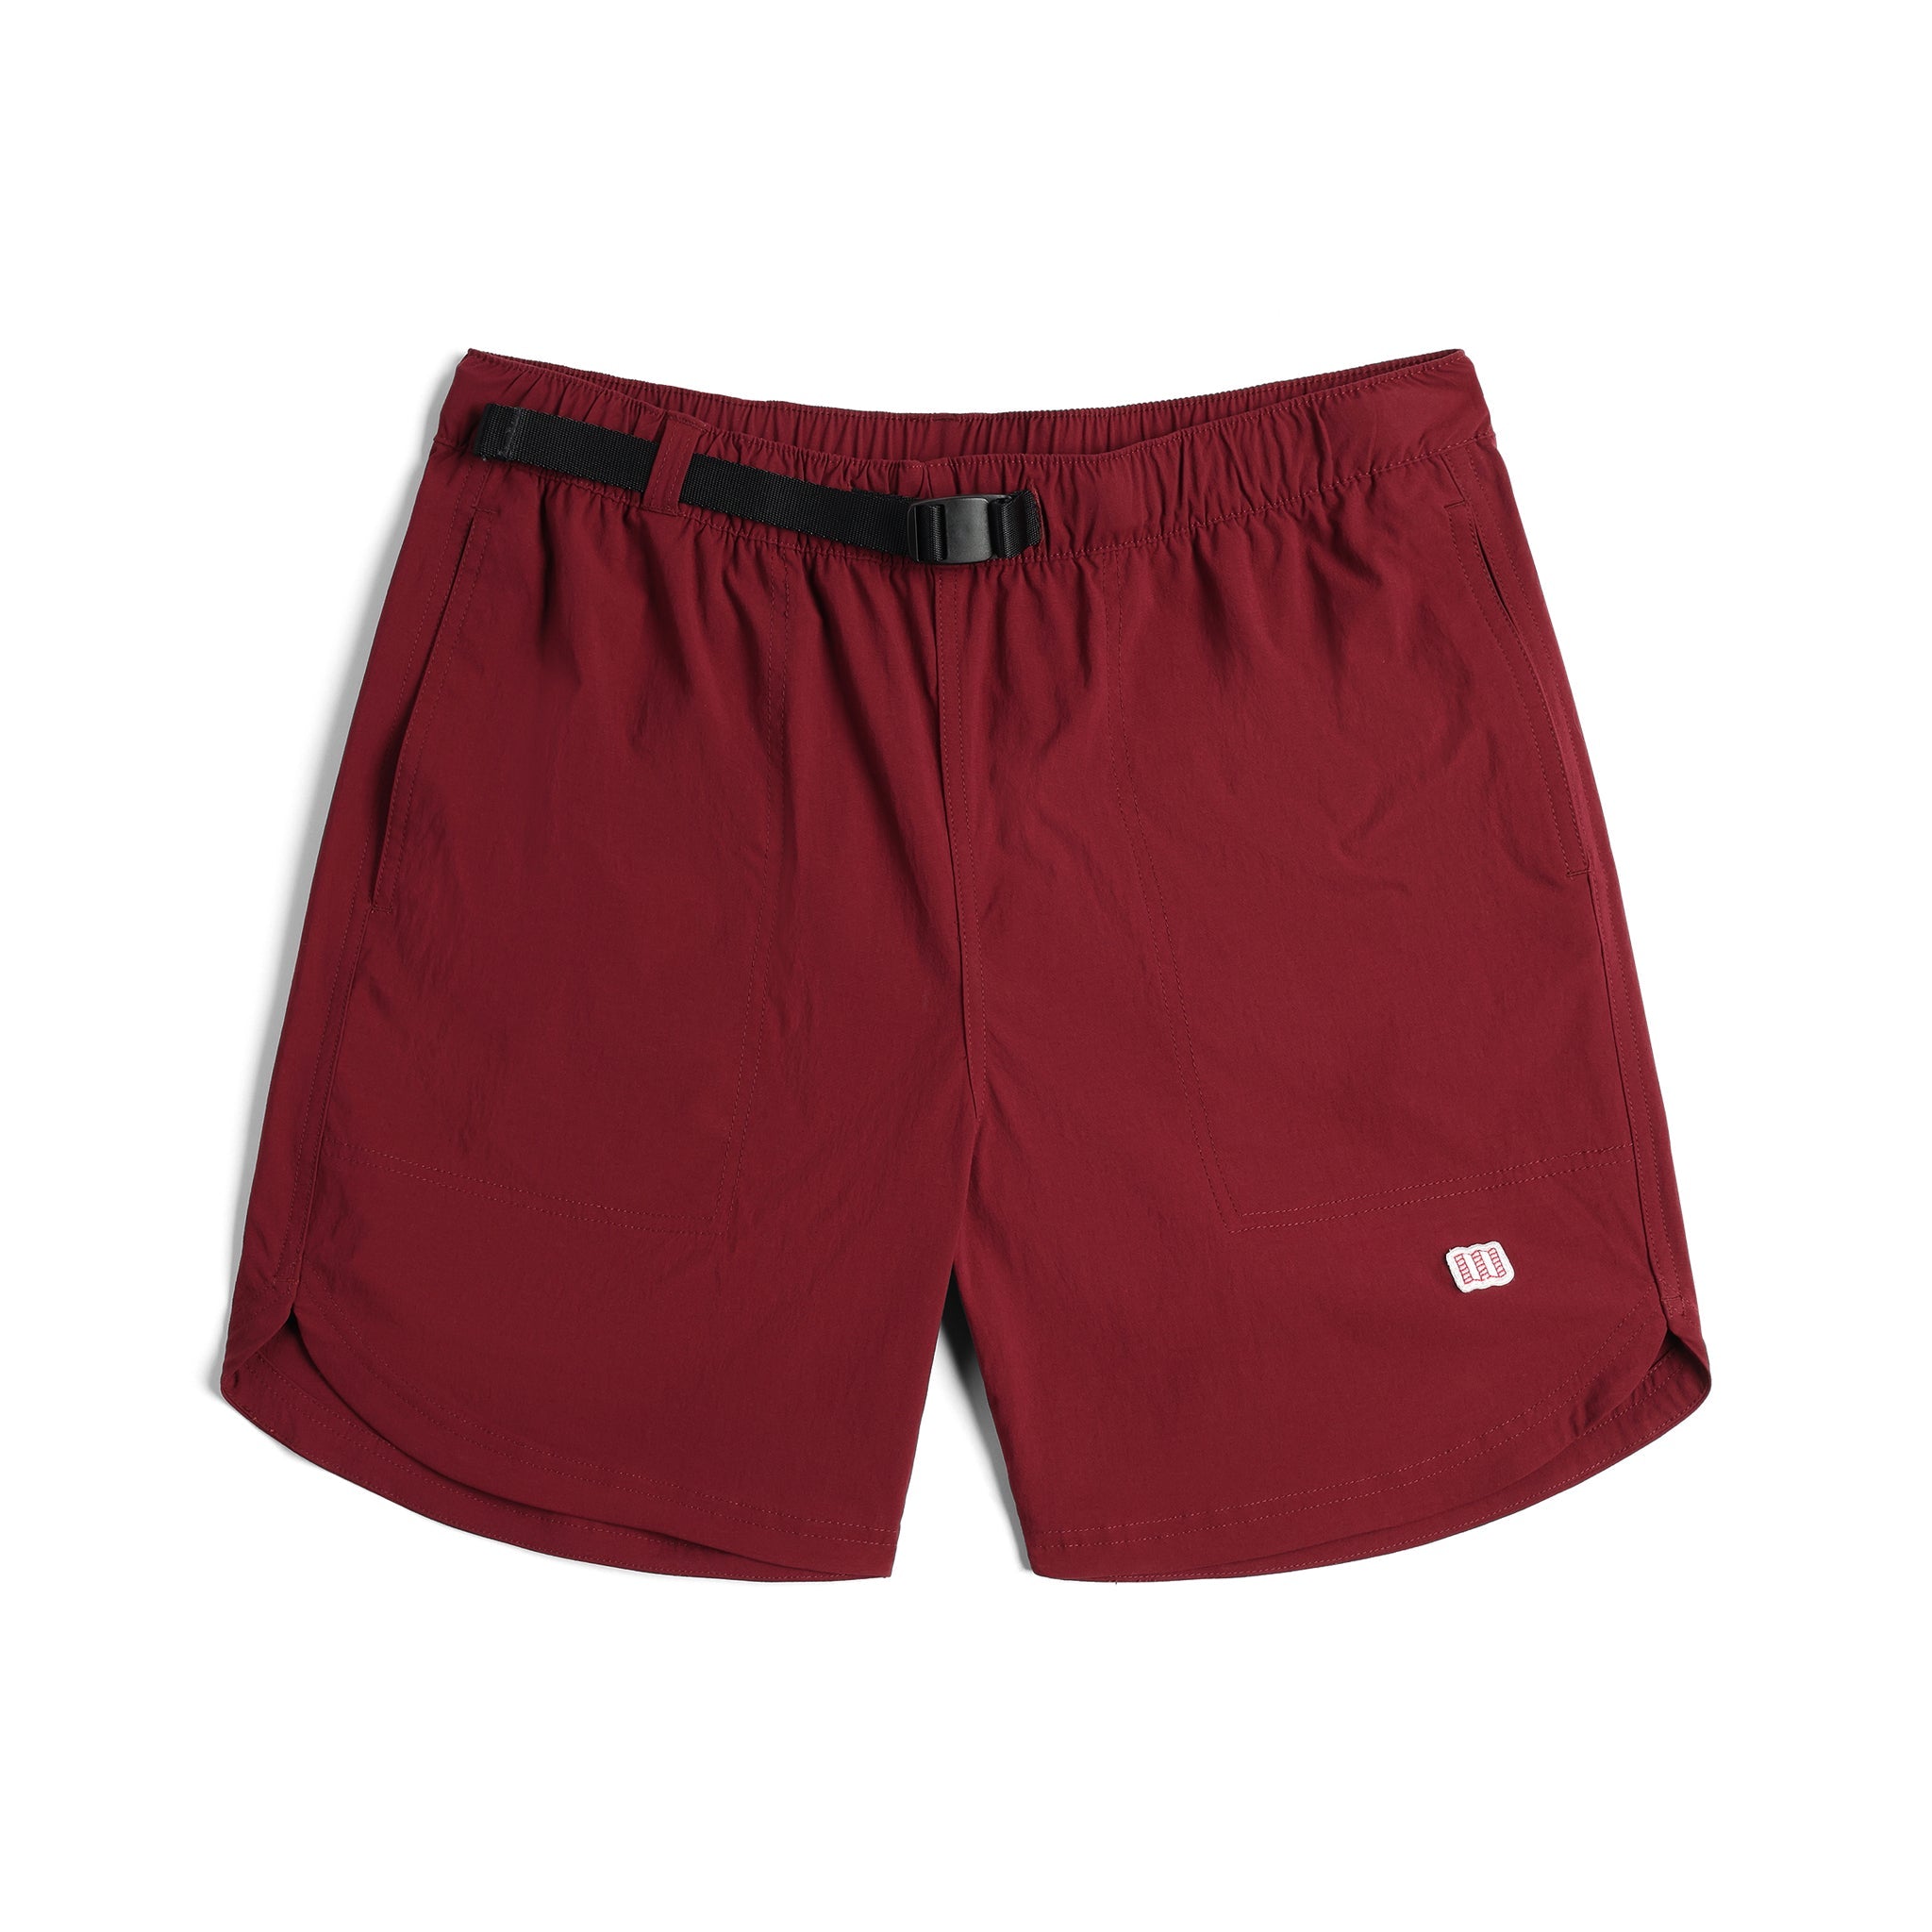 Front View of Topo Designs River Shorts - Men's in "Burgundy"